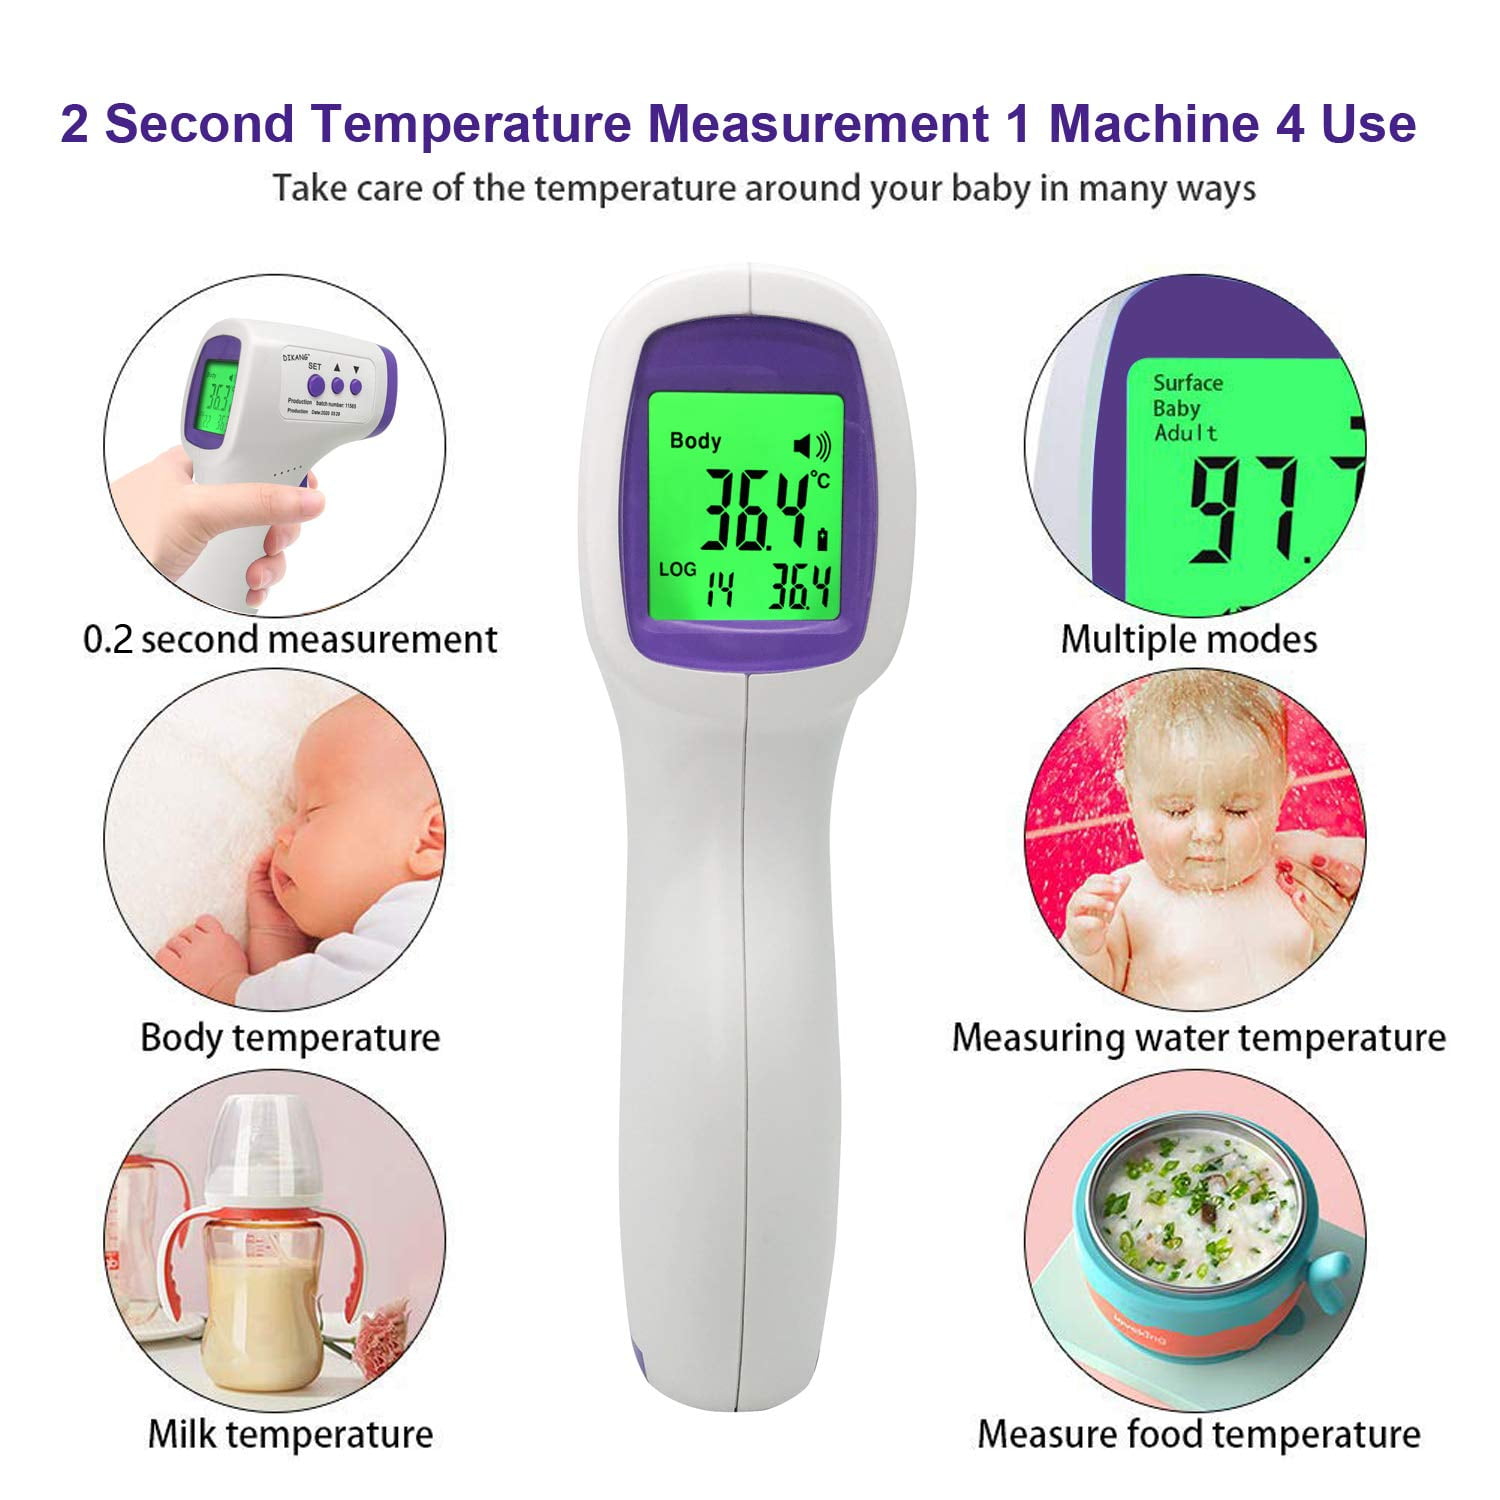 Infrared Forehead Thermometer, Non-Contact Household Body Thermometer  Temperature Meter Home Fast Measuring,Infrared Thermometer 